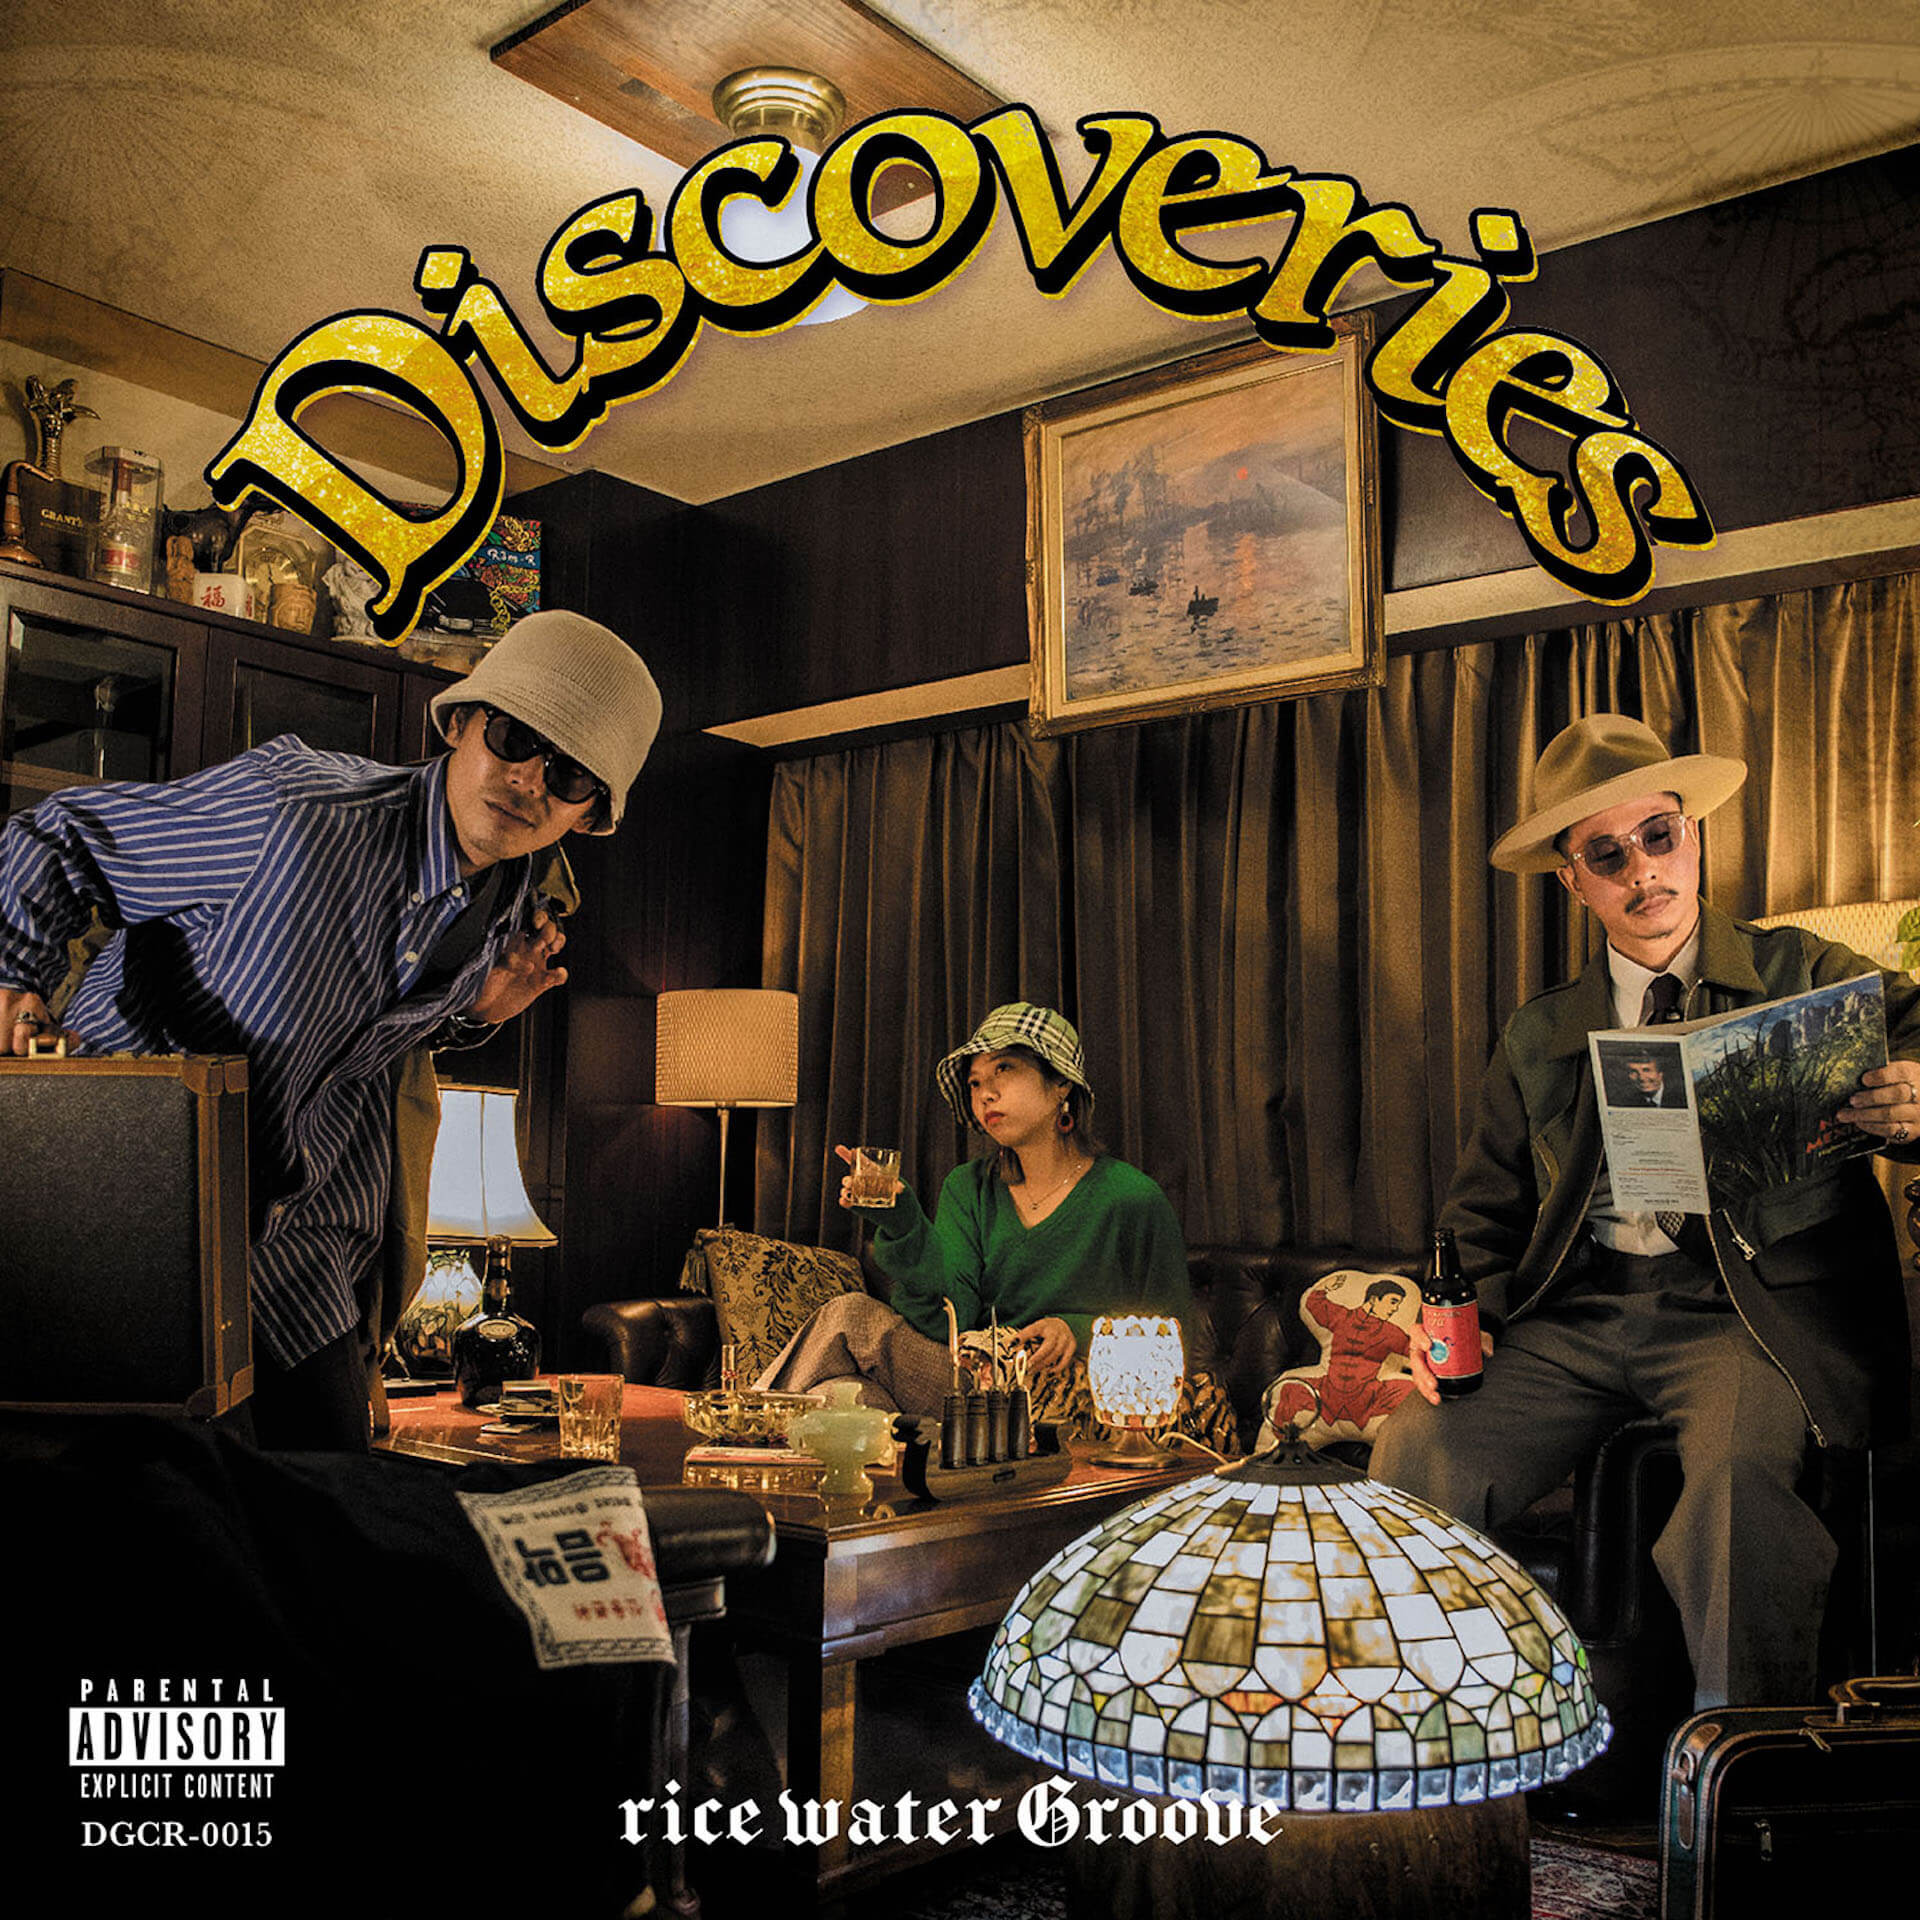 rice water Grooveが1stアルバム『Discoveries』をリリース！先行配信曲"NEW EDEN"のMV公開 music211216_rice-water-groove-02